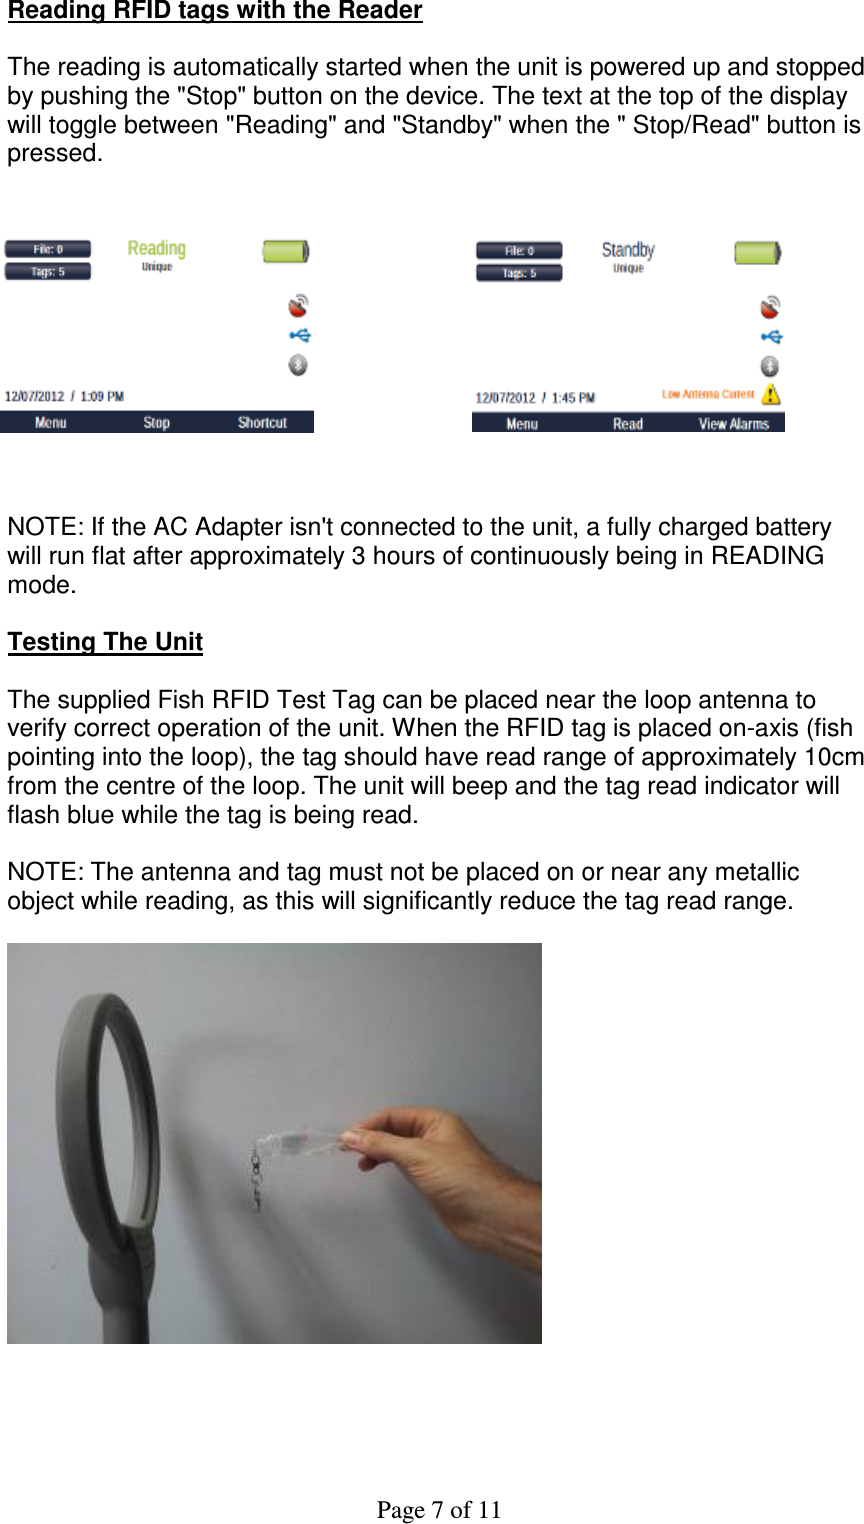 Page 7 of 11 Reading RFID tags with the Reader  The reading is automatically started when the unit is powered up and stopped  by pushing the &quot;Stop&quot; button on the device. The text at the top of the display will toggle between &quot;Reading&quot; and &quot;Standby&quot; when the &quot; Stop/Read&quot; button is pressed.             NOTE: If the AC Adapter isn&apos;t connected to the unit, a fully charged battery will run flat after approximately 3 hours of continuously being in READING mode.  Testing The Unit  The supplied Fish RFID Test Tag can be placed near the loop antenna to verify correct operation of the unit. When the RFID tag is placed on-axis (fish pointing into the loop), the tag should have read range of approximately 10cm from the centre of the loop. The unit will beep and the tag read indicator will flash blue while the tag is being read.  NOTE: The antenna and tag must not be placed on or near any metallic object while reading, as this will significantly reduce the tag read range.        